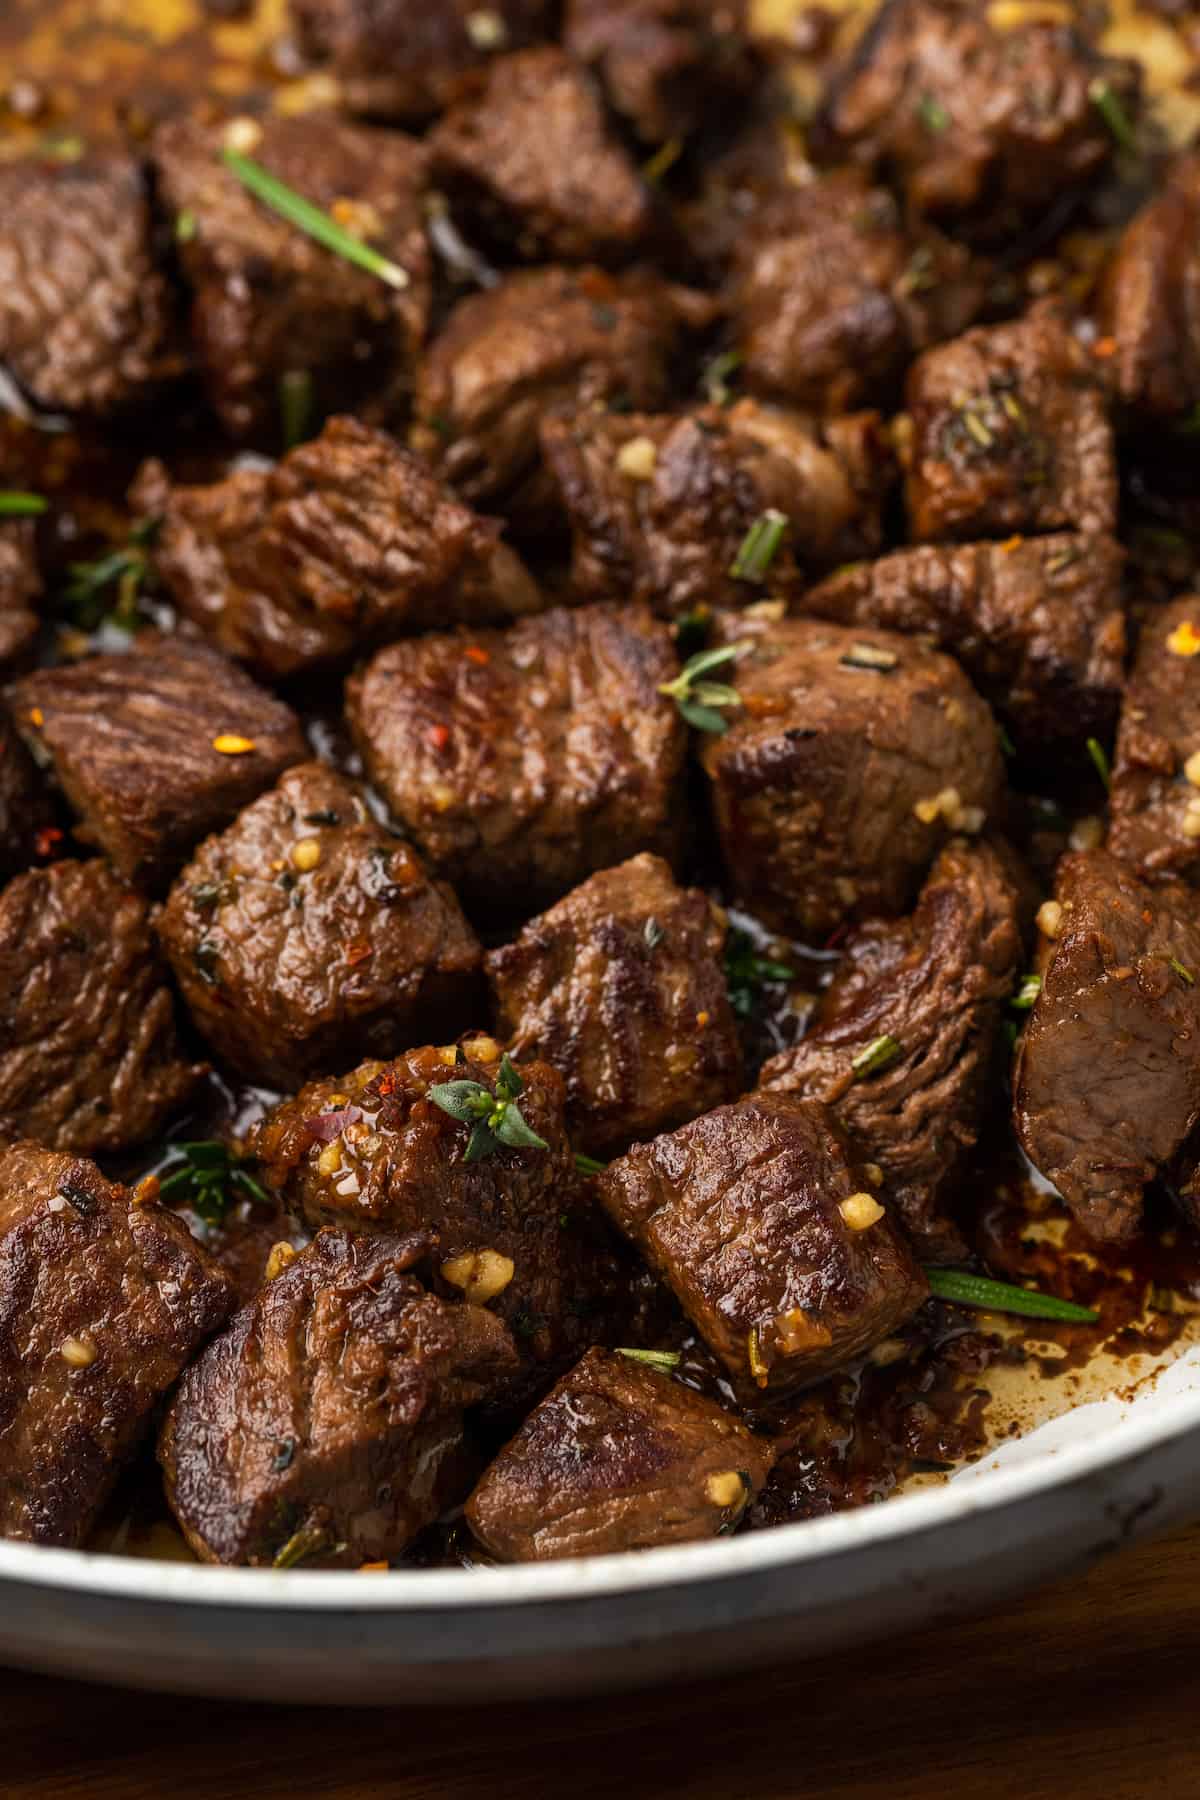 These easy Garlic Butter Steak Bites are cooked in a sauce with fresh herbs, chili flakes, and garlic. This steak recipe is naturally low-carb, requires one pan, and takes just 15 minutes to make.